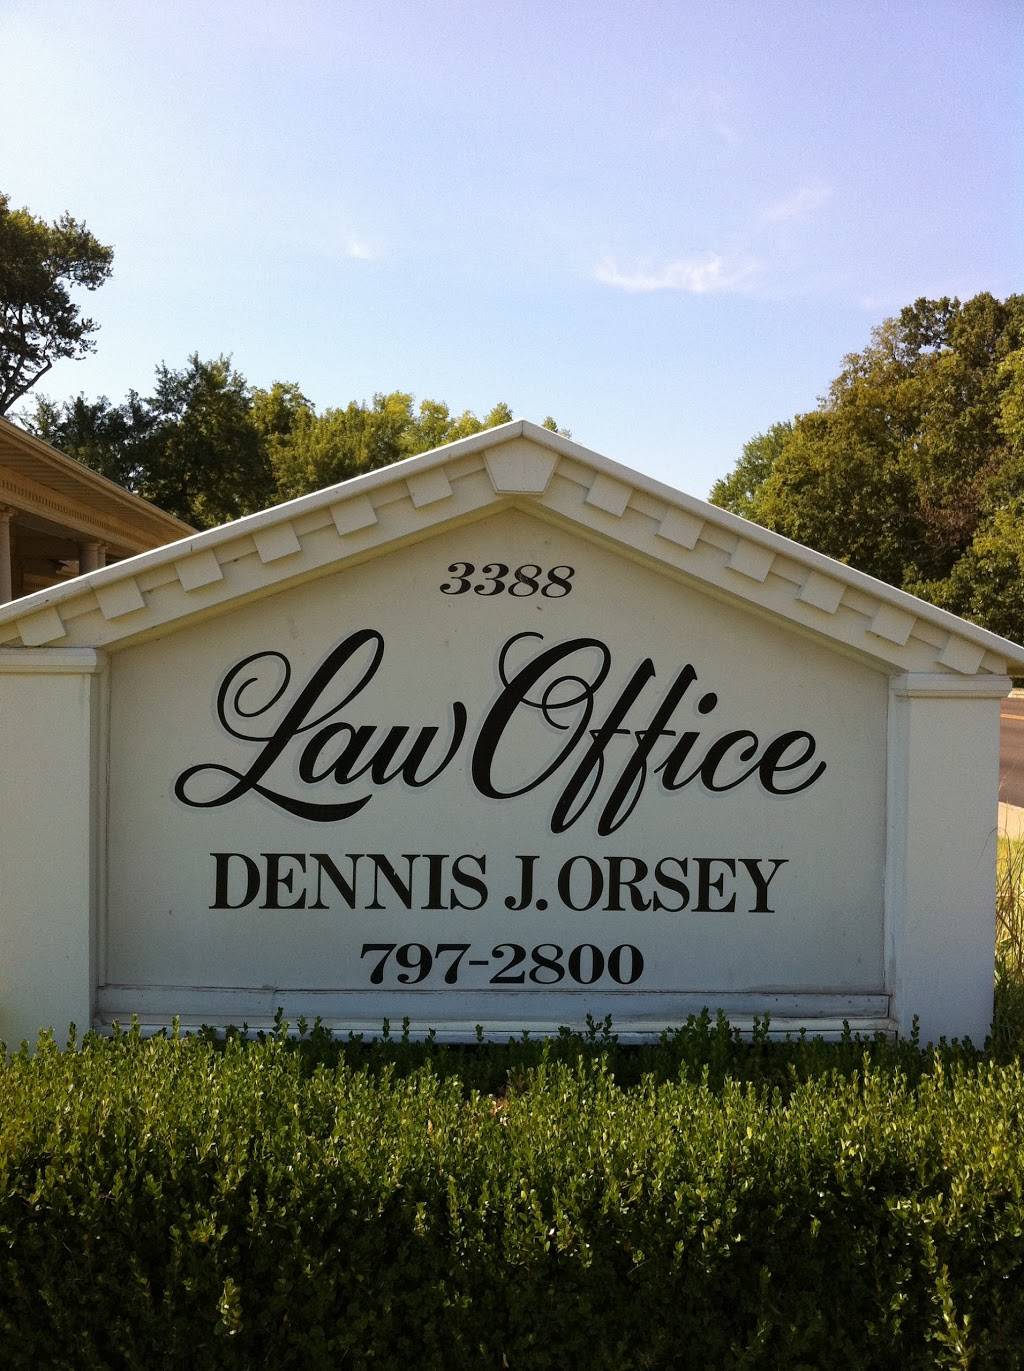 Dennis J Orsey Law Offices: Orsey Dennis J | 3388 Maryville Rd # A, Granite City, IL 62040, USA | Phone: (618) 797-2800